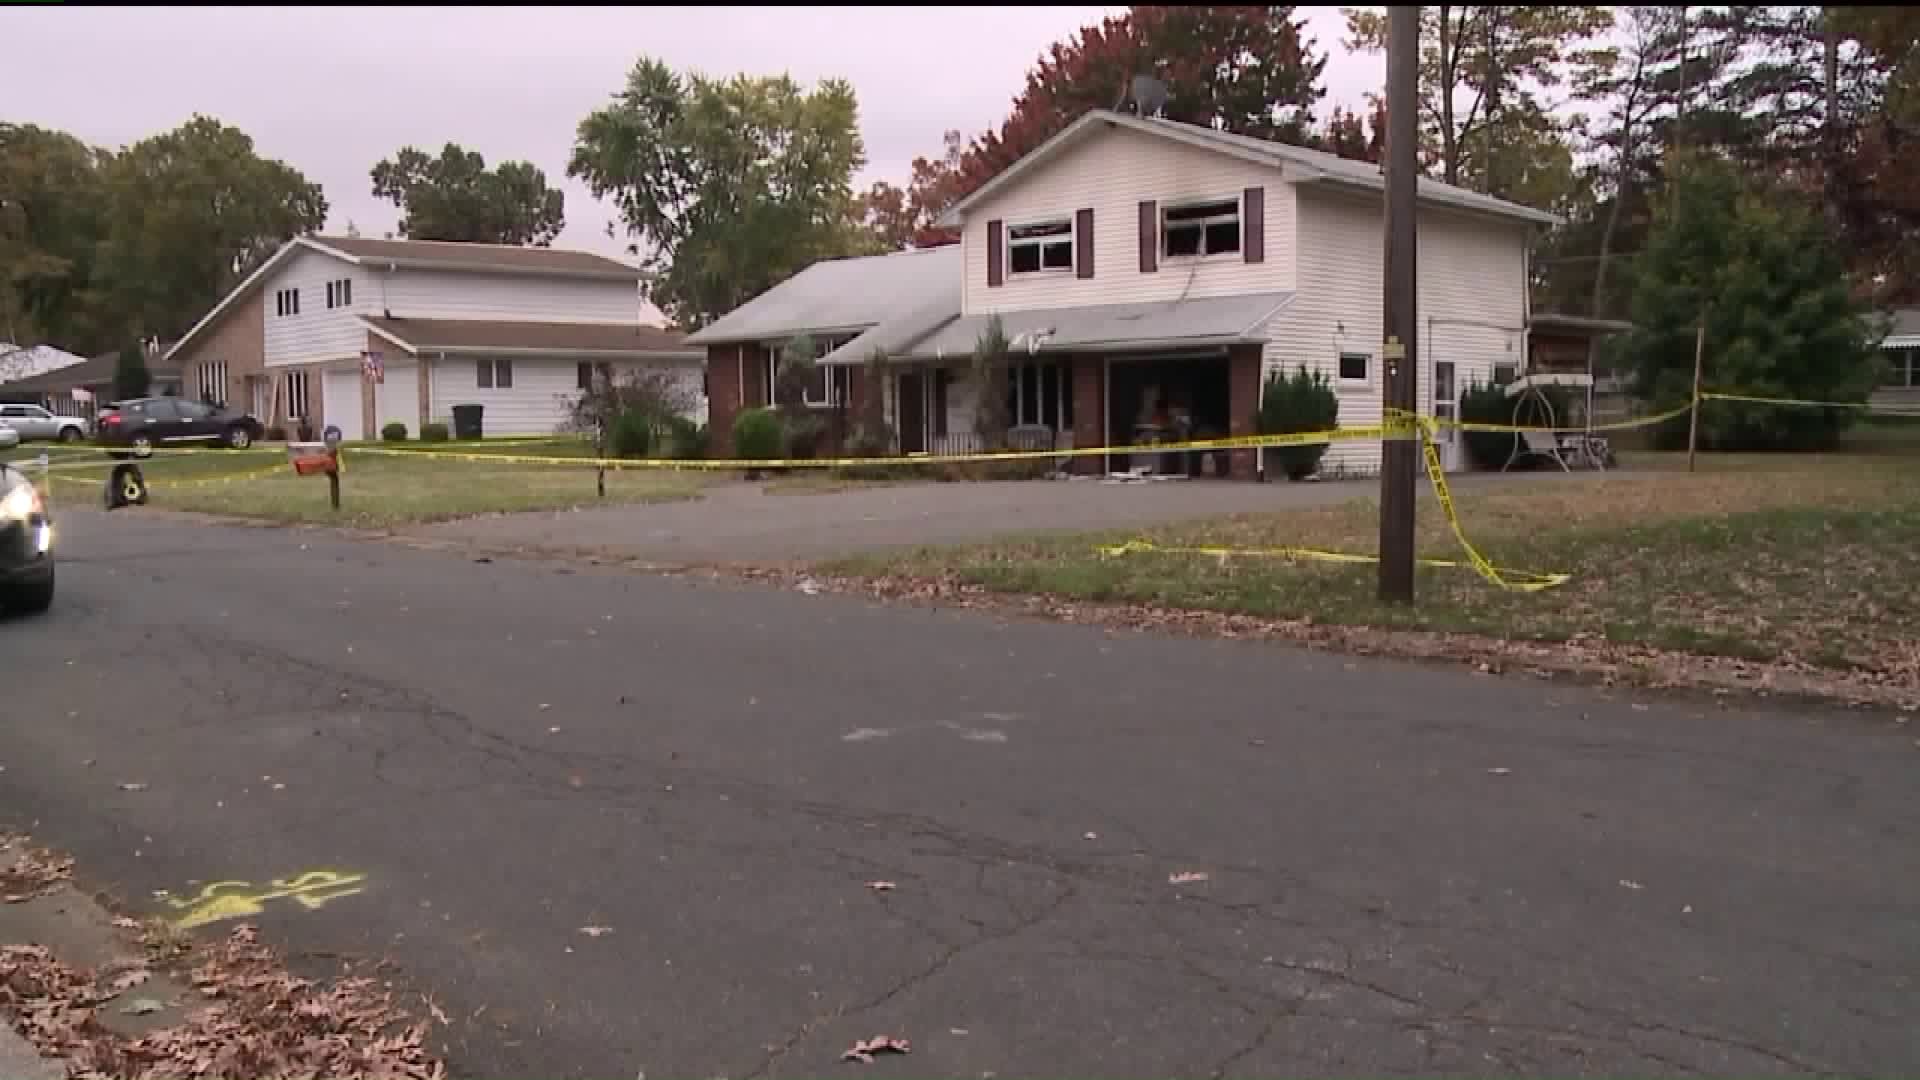 Neighbors in Laflin Stunned by Death of Two Boys